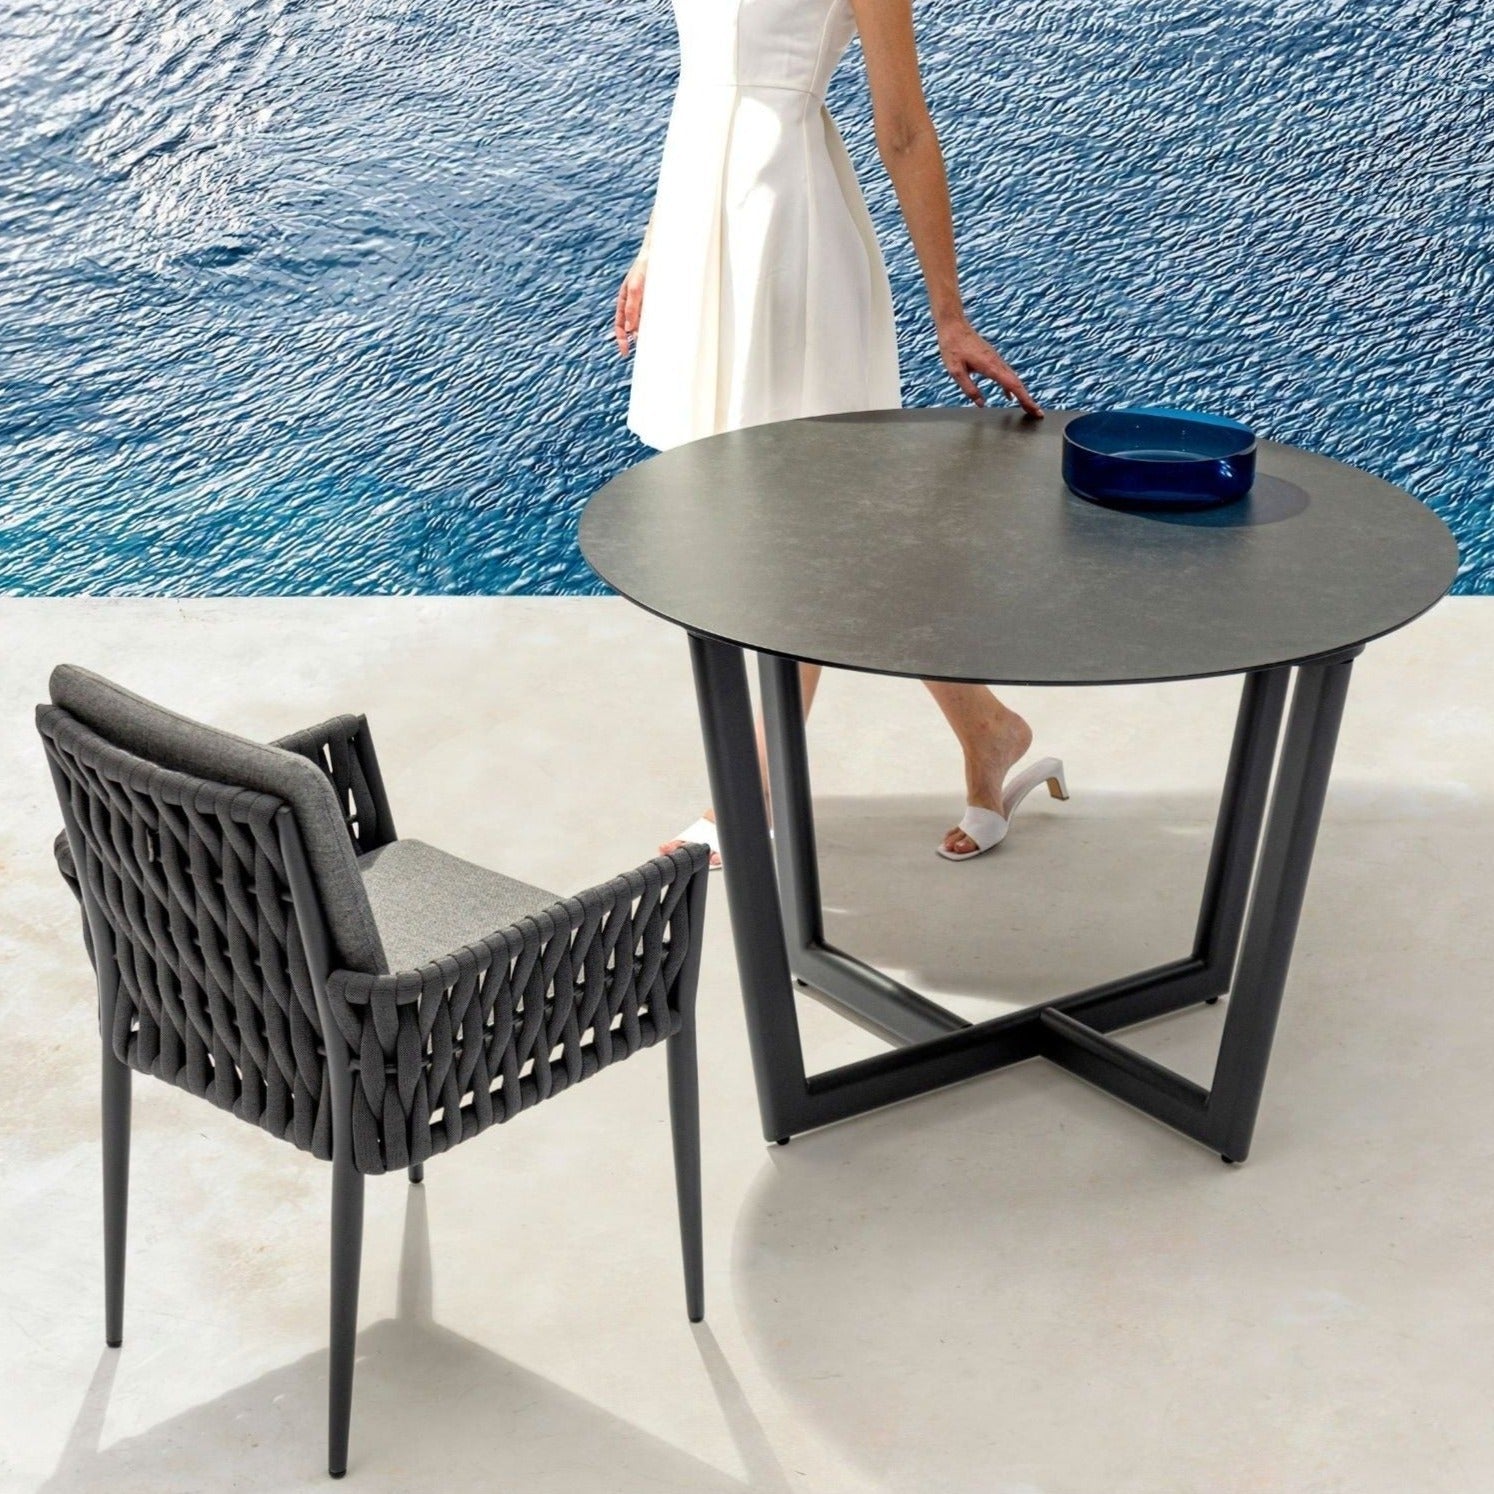 Hug Series | Outdoor Round Dining Table